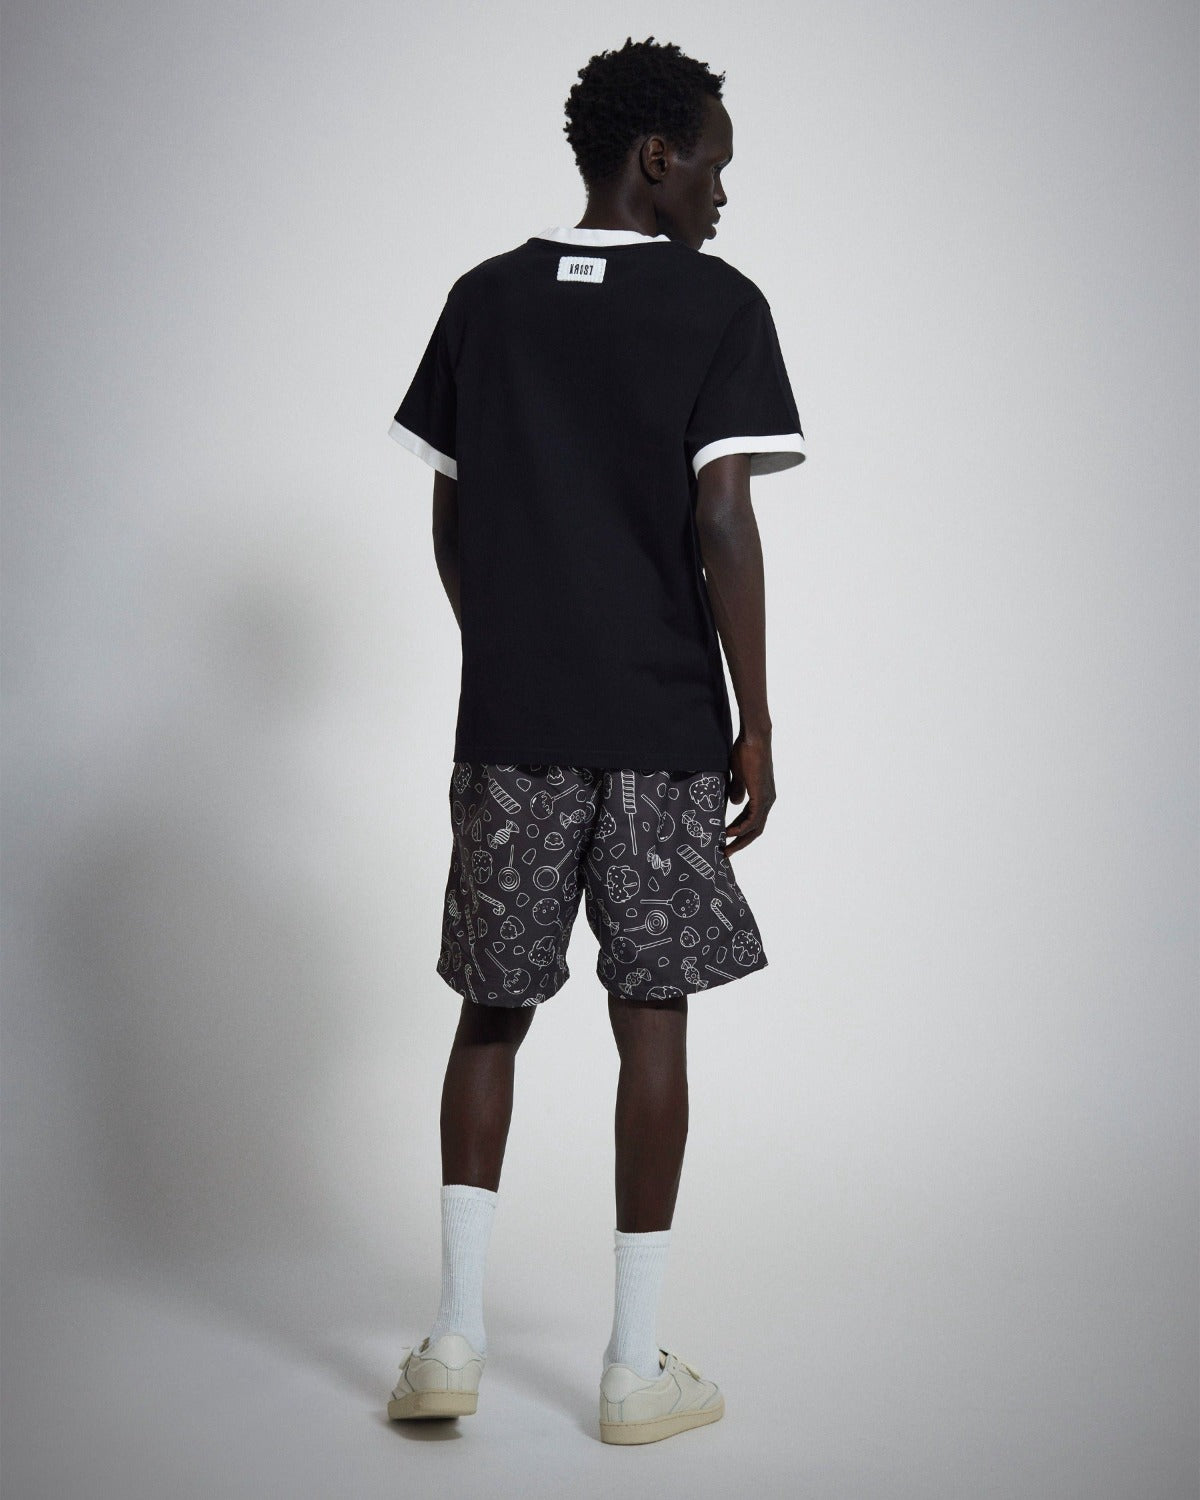 Photo of KROST x Candy Land | Gum Drop Short Sleeve Tee, number 5